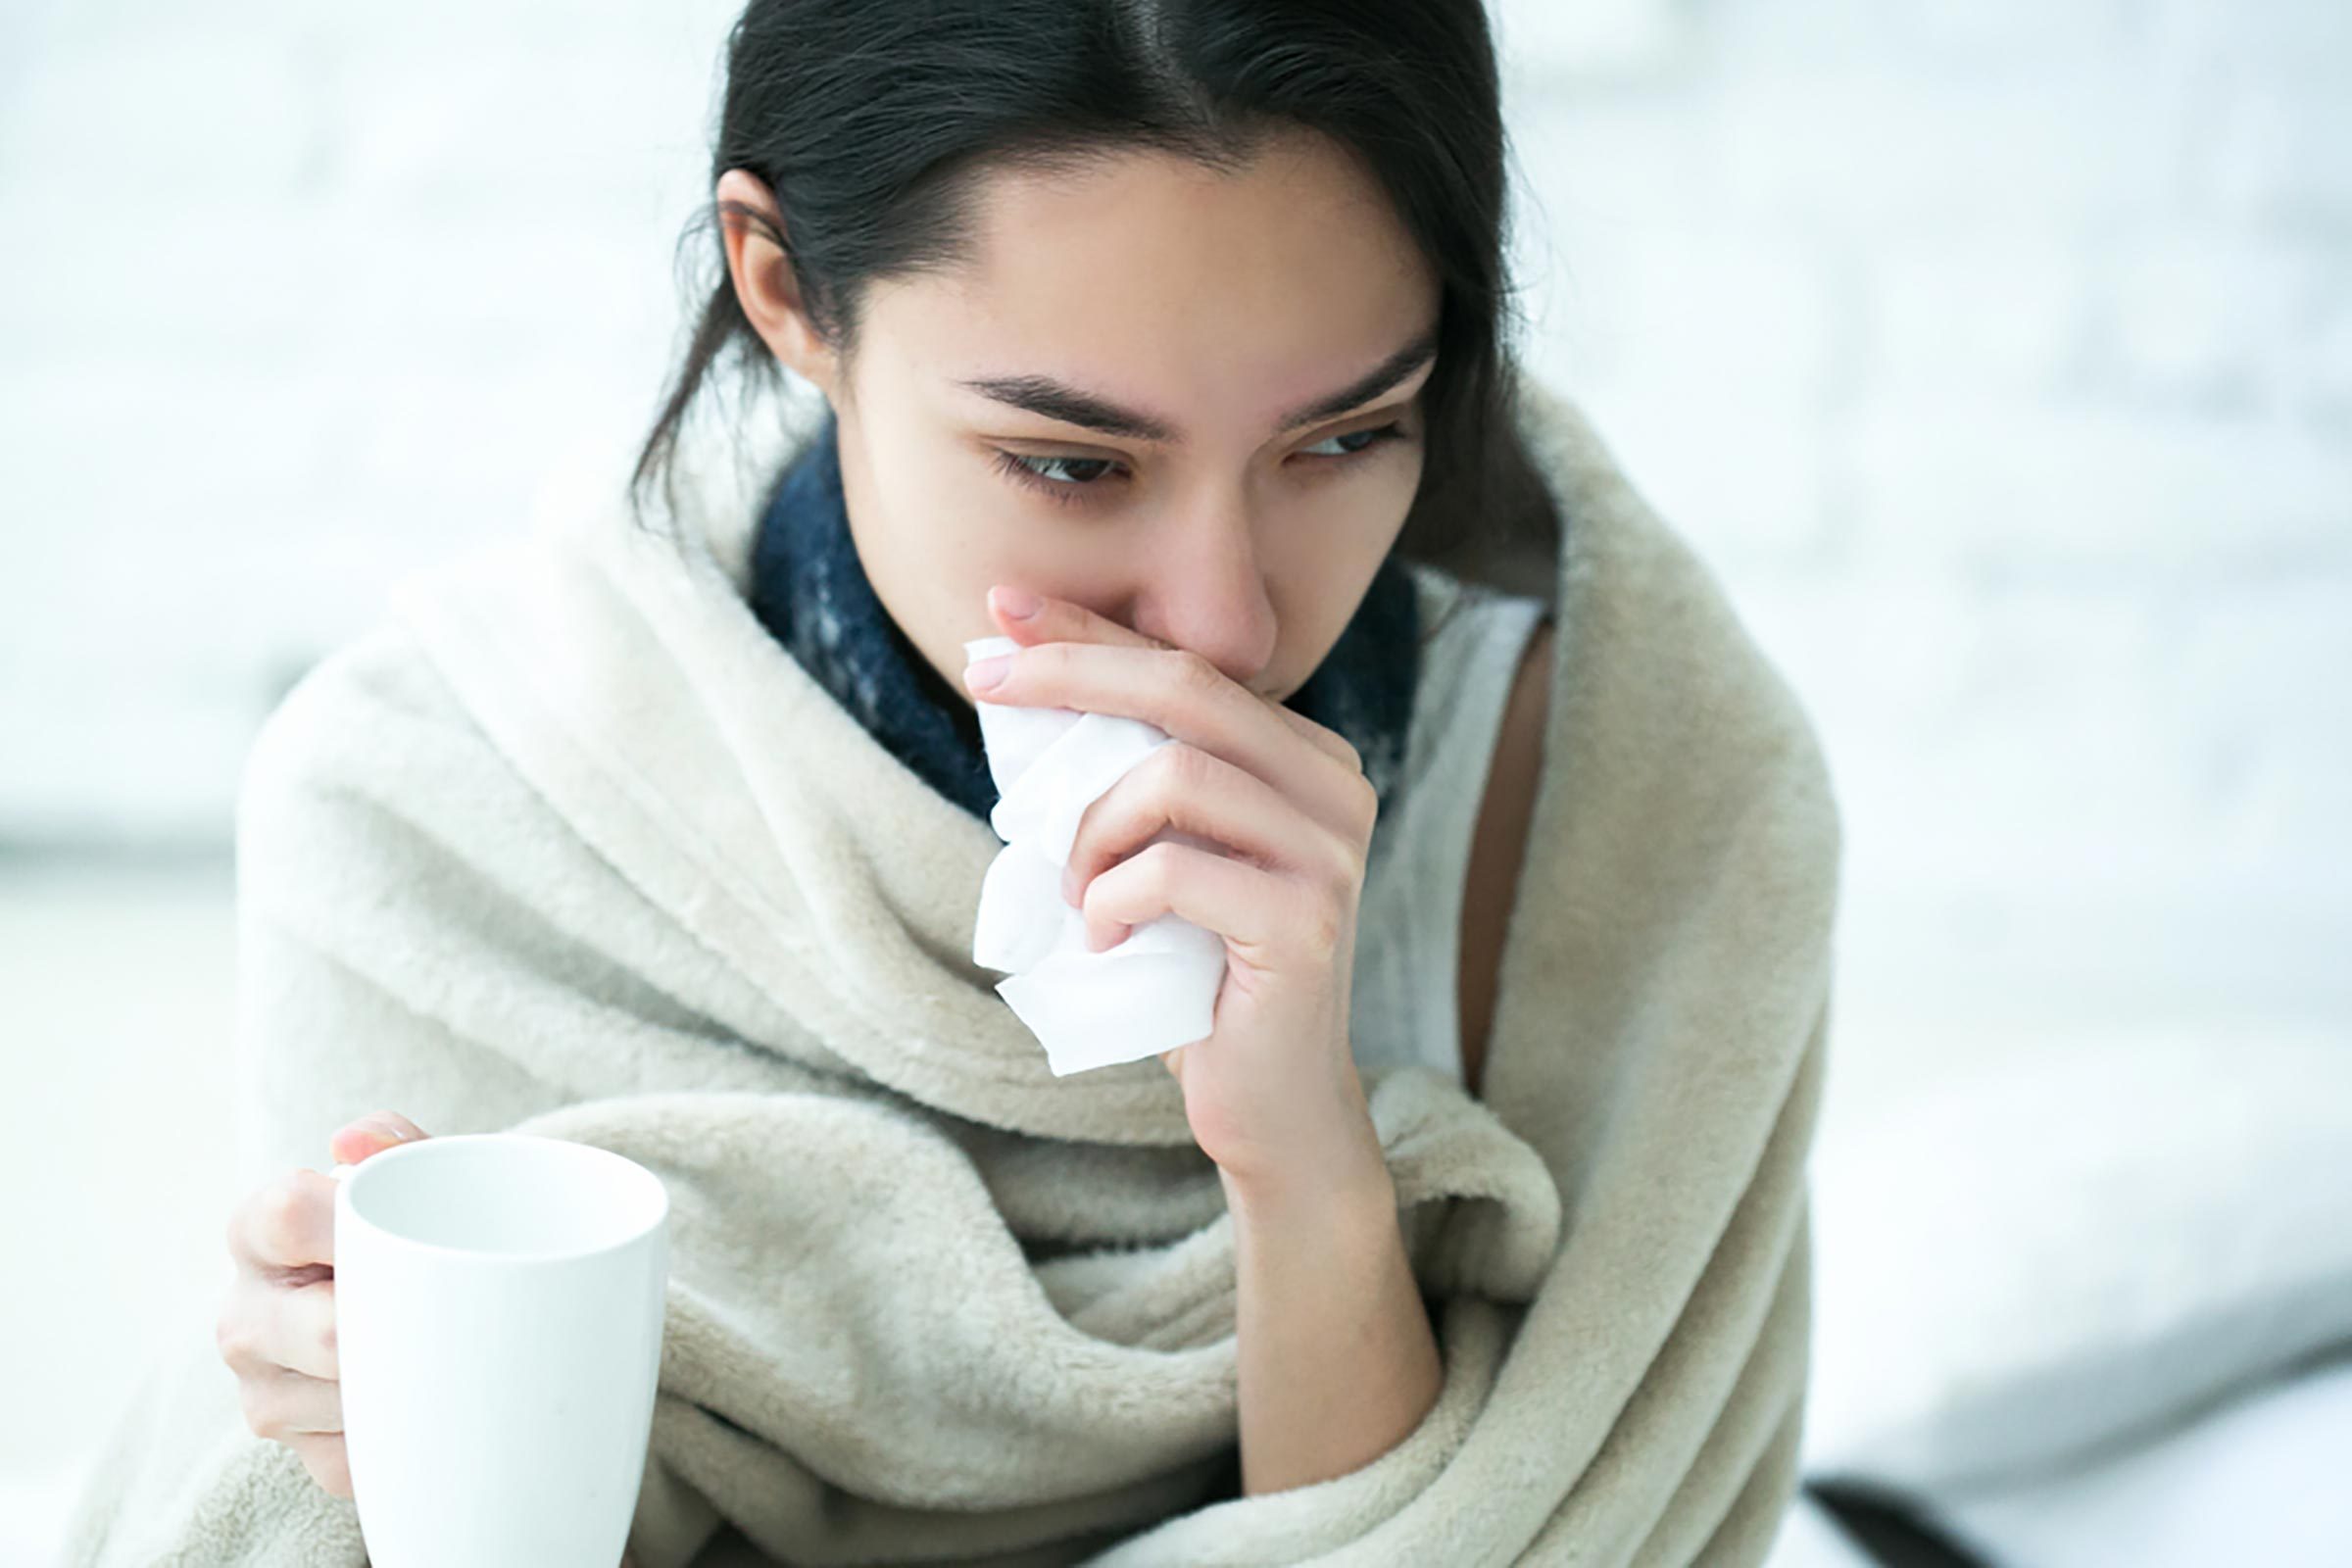 7 Surprising Ways Your Body Responds to the Common Cold